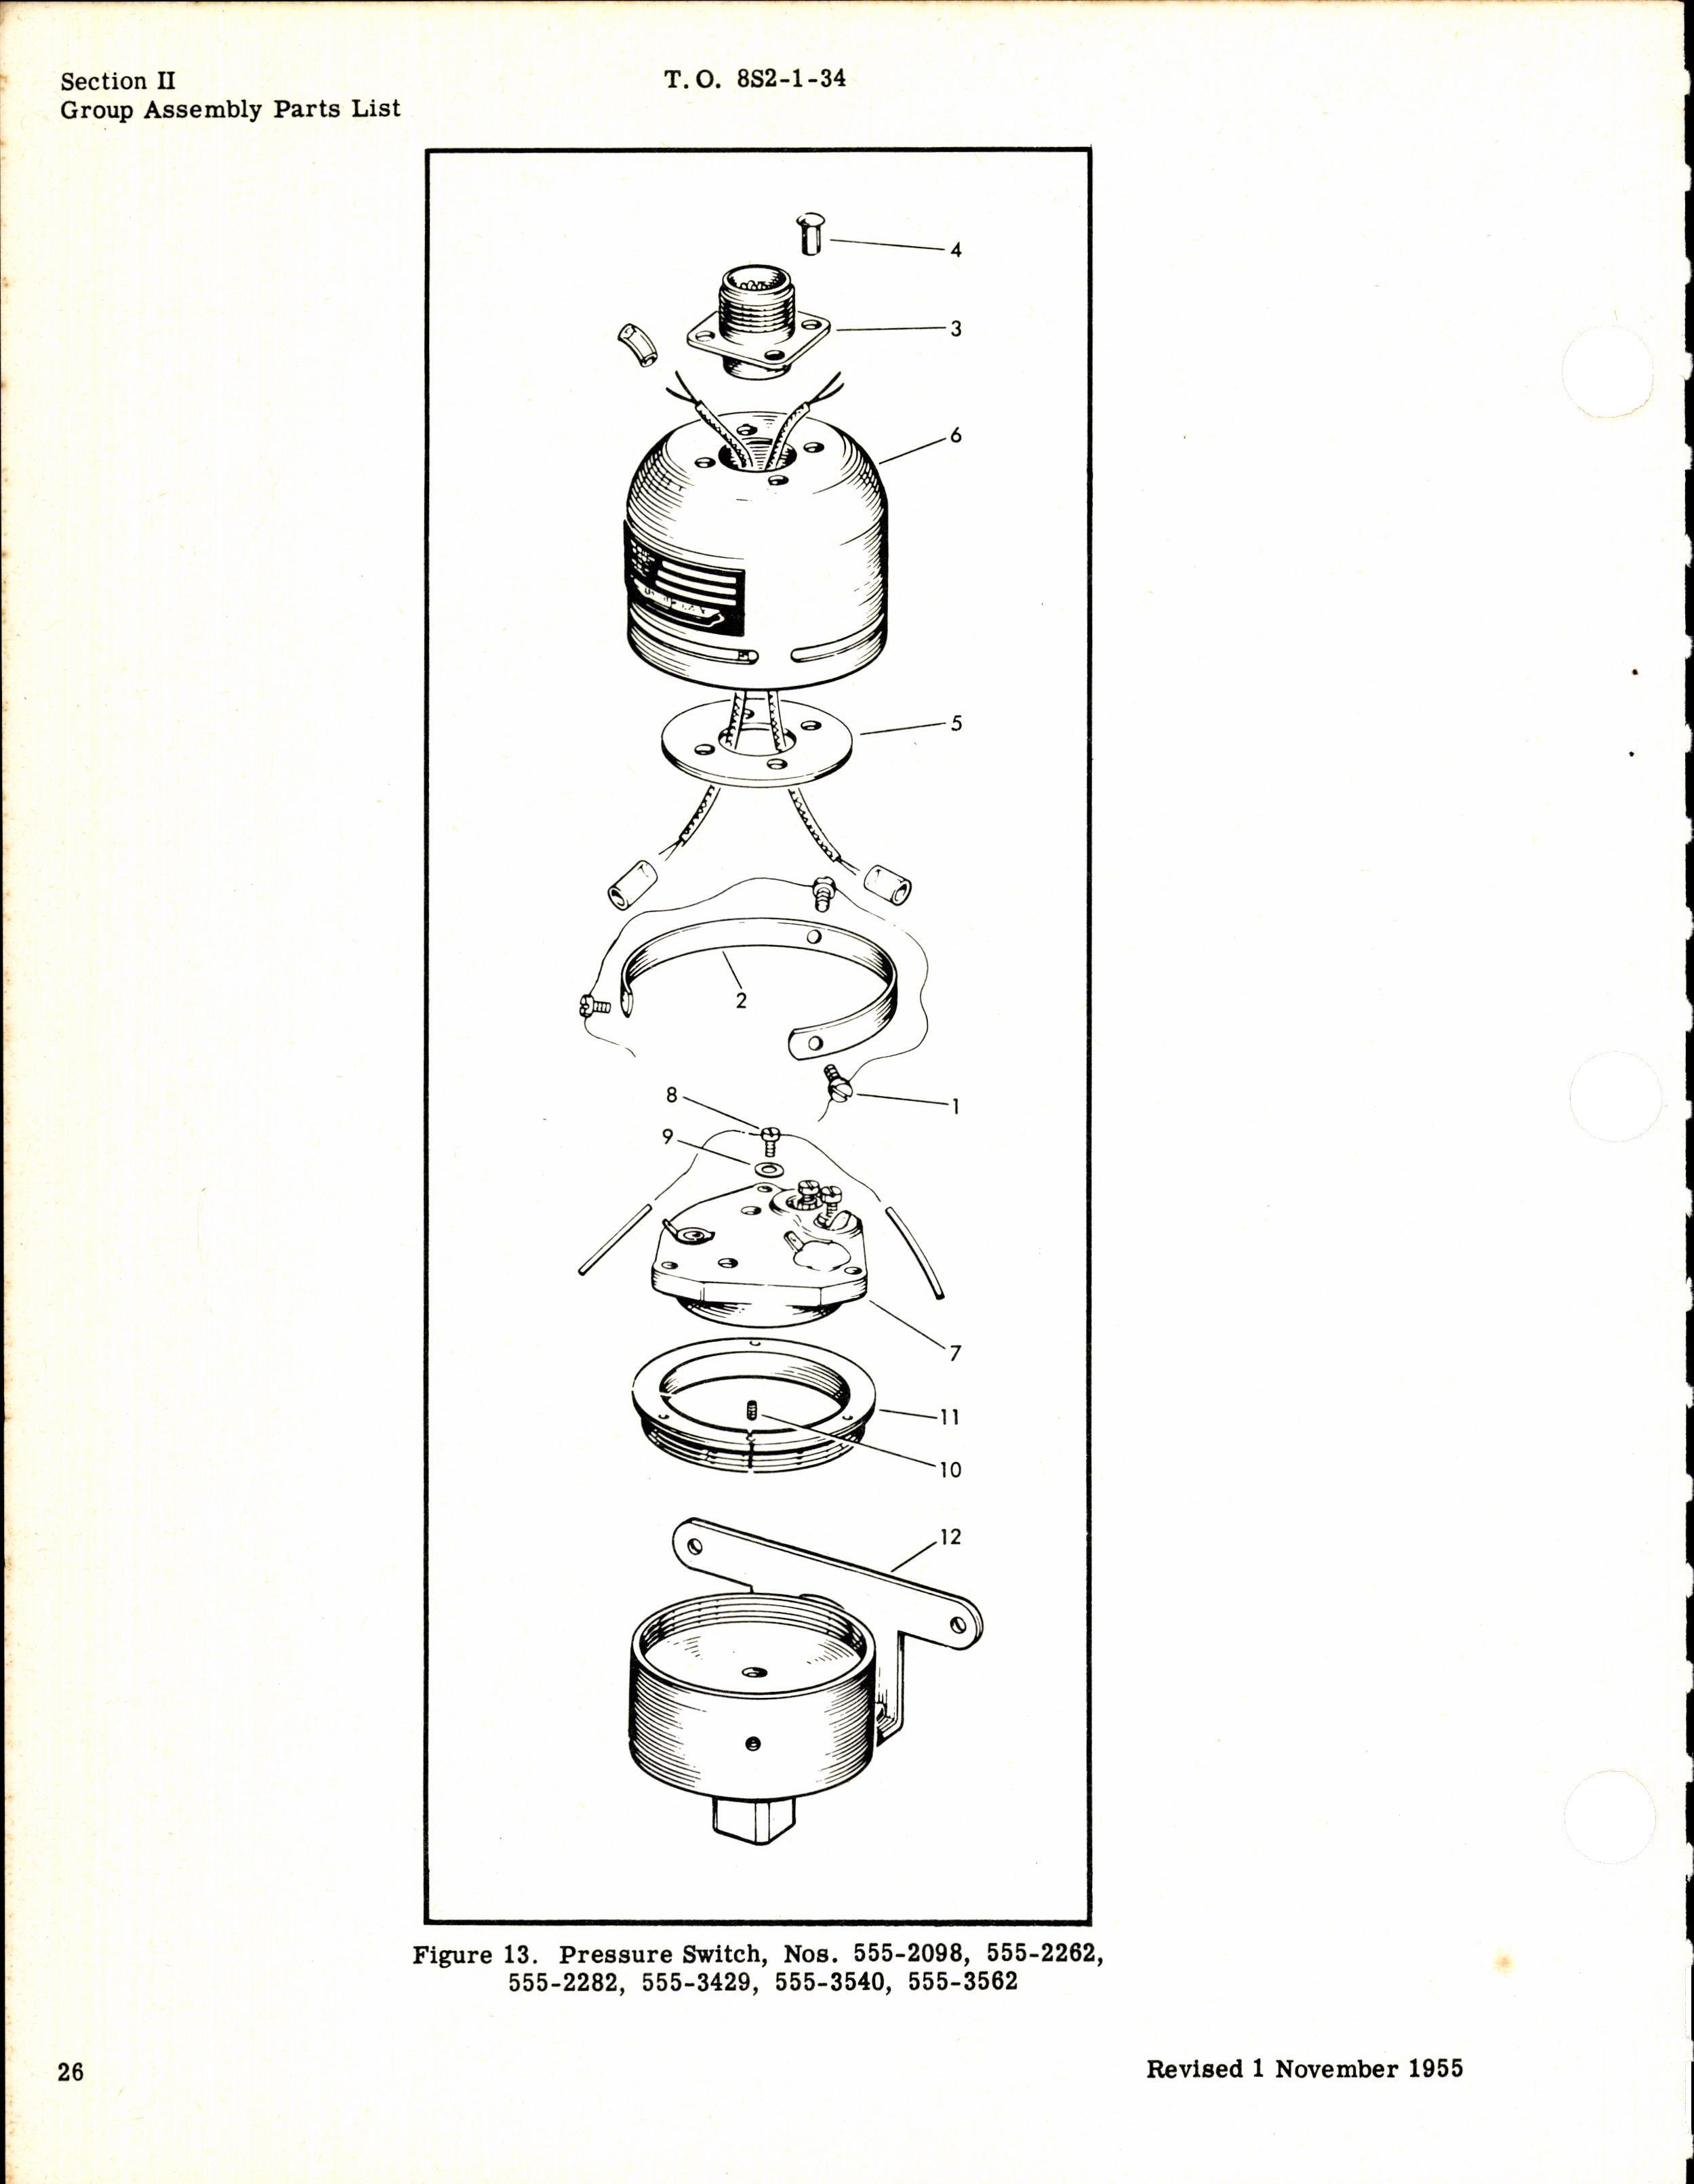 Sample page 6 from AirCorps Library document: Parts Catalog for Cook Pressure Control Switches